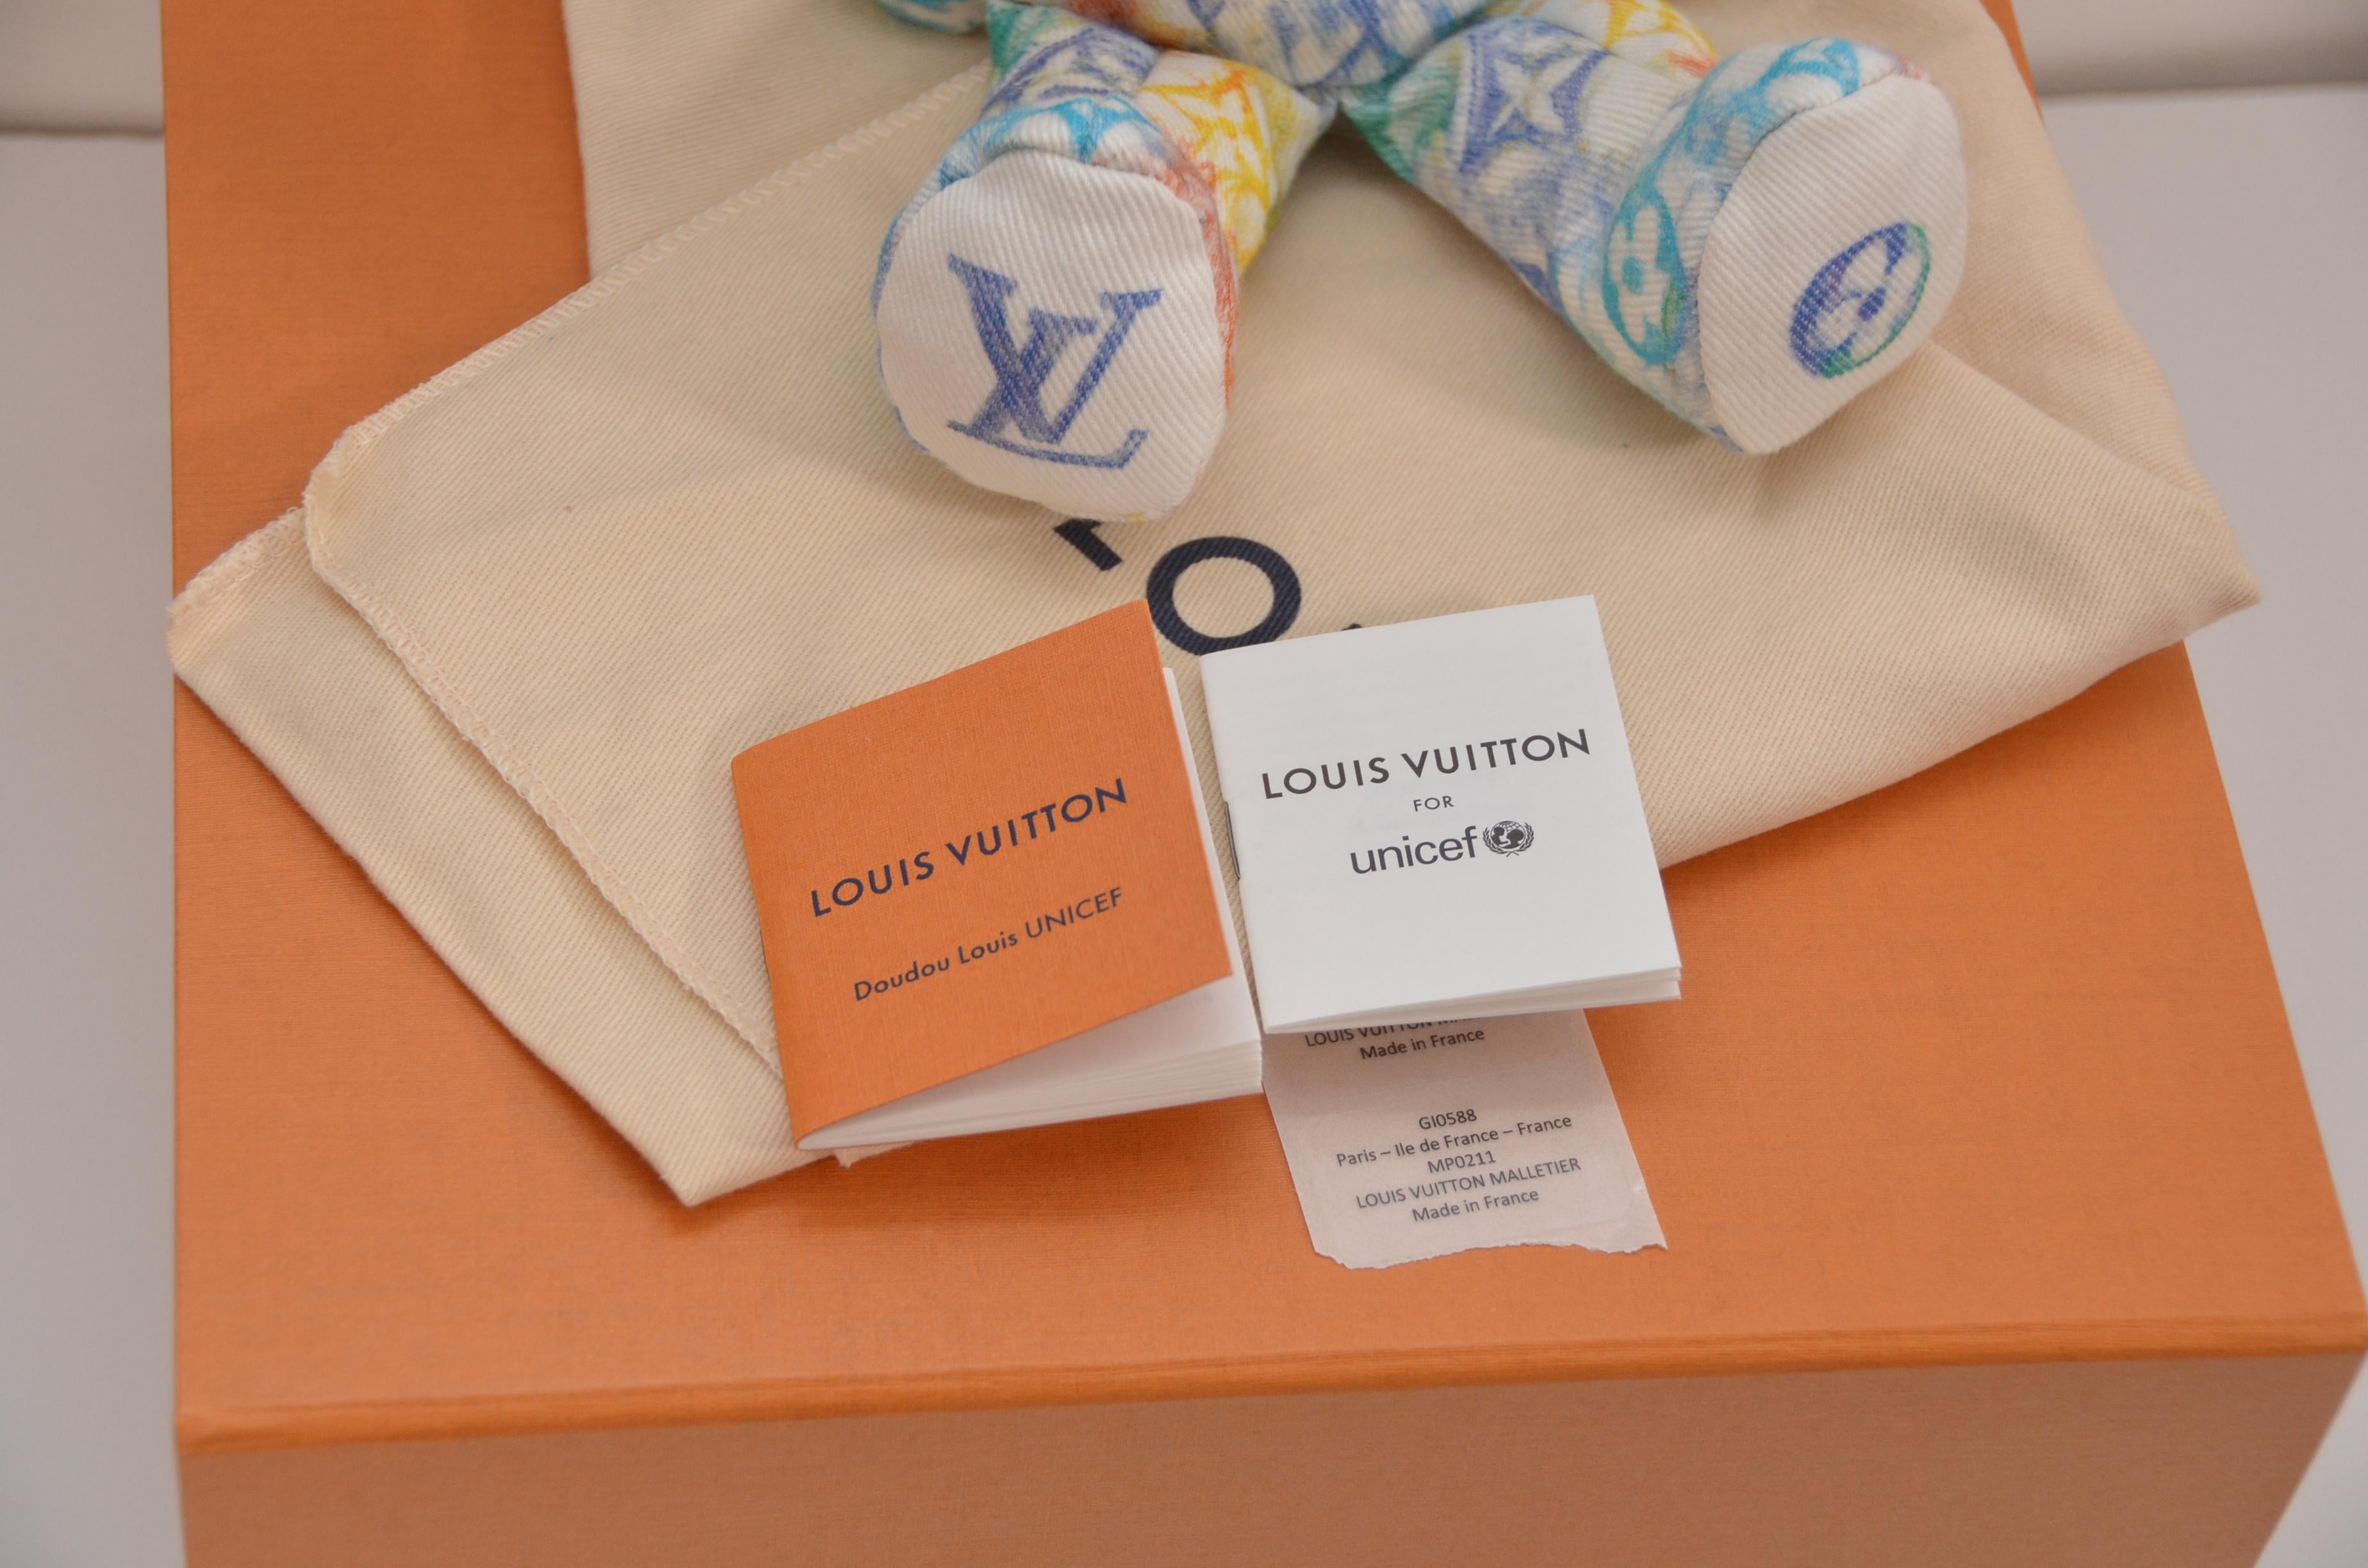 Louis Vuitton For UNICEF DouDou Mini Teddy Bear Watercolors Print NEW With Box  1